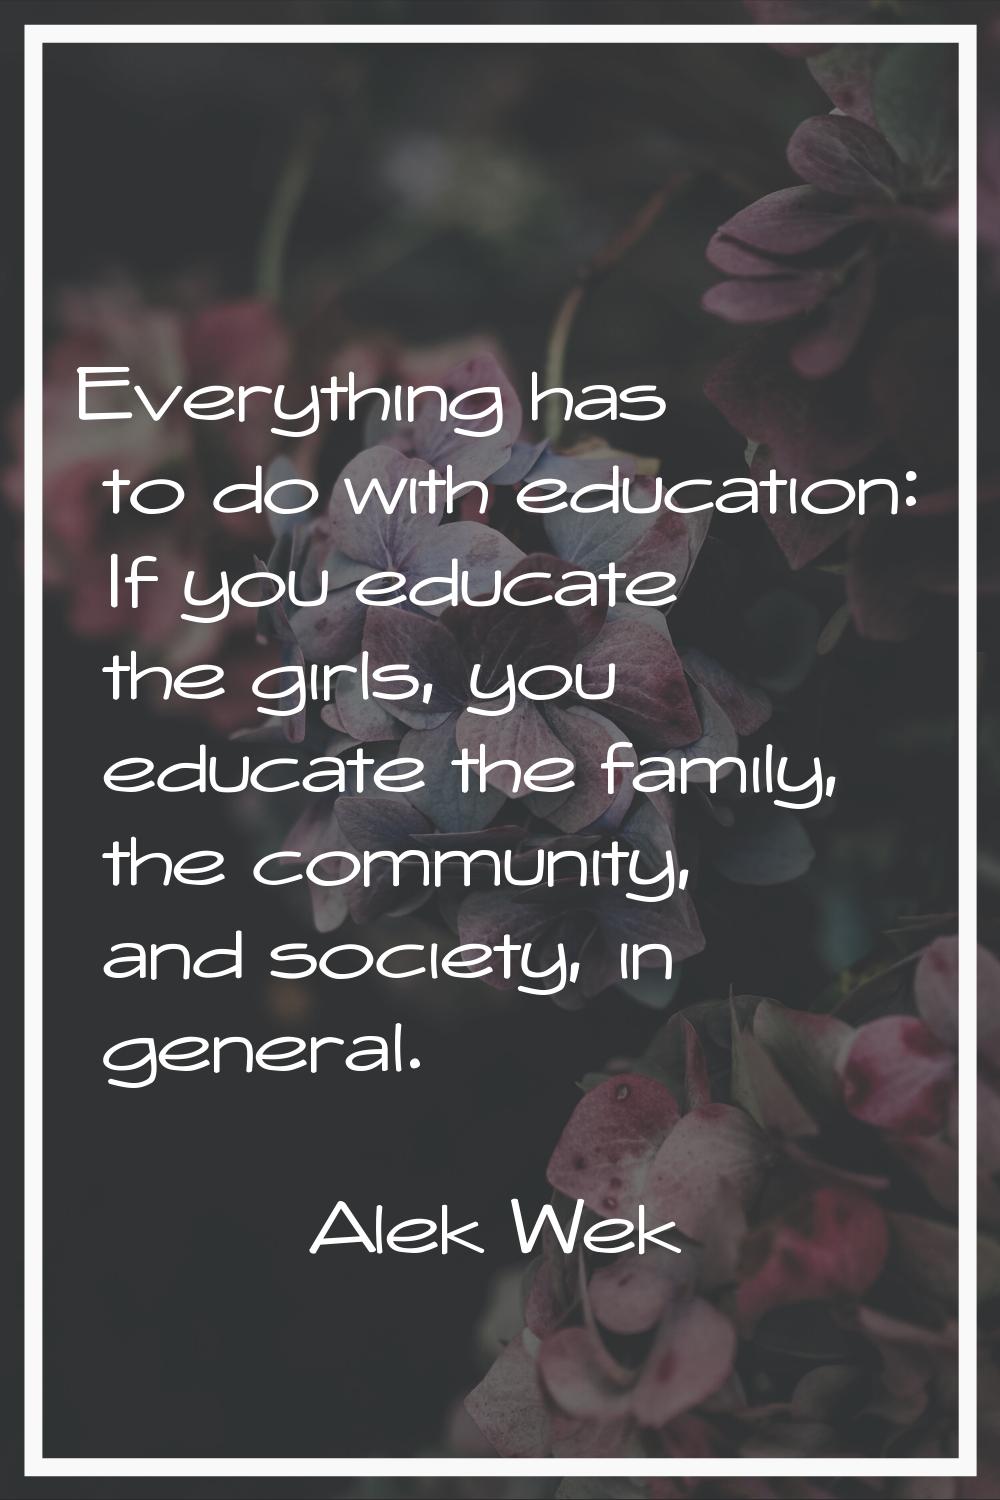 Everything has to do with education: If you educate the girls, you educate the family, the communit